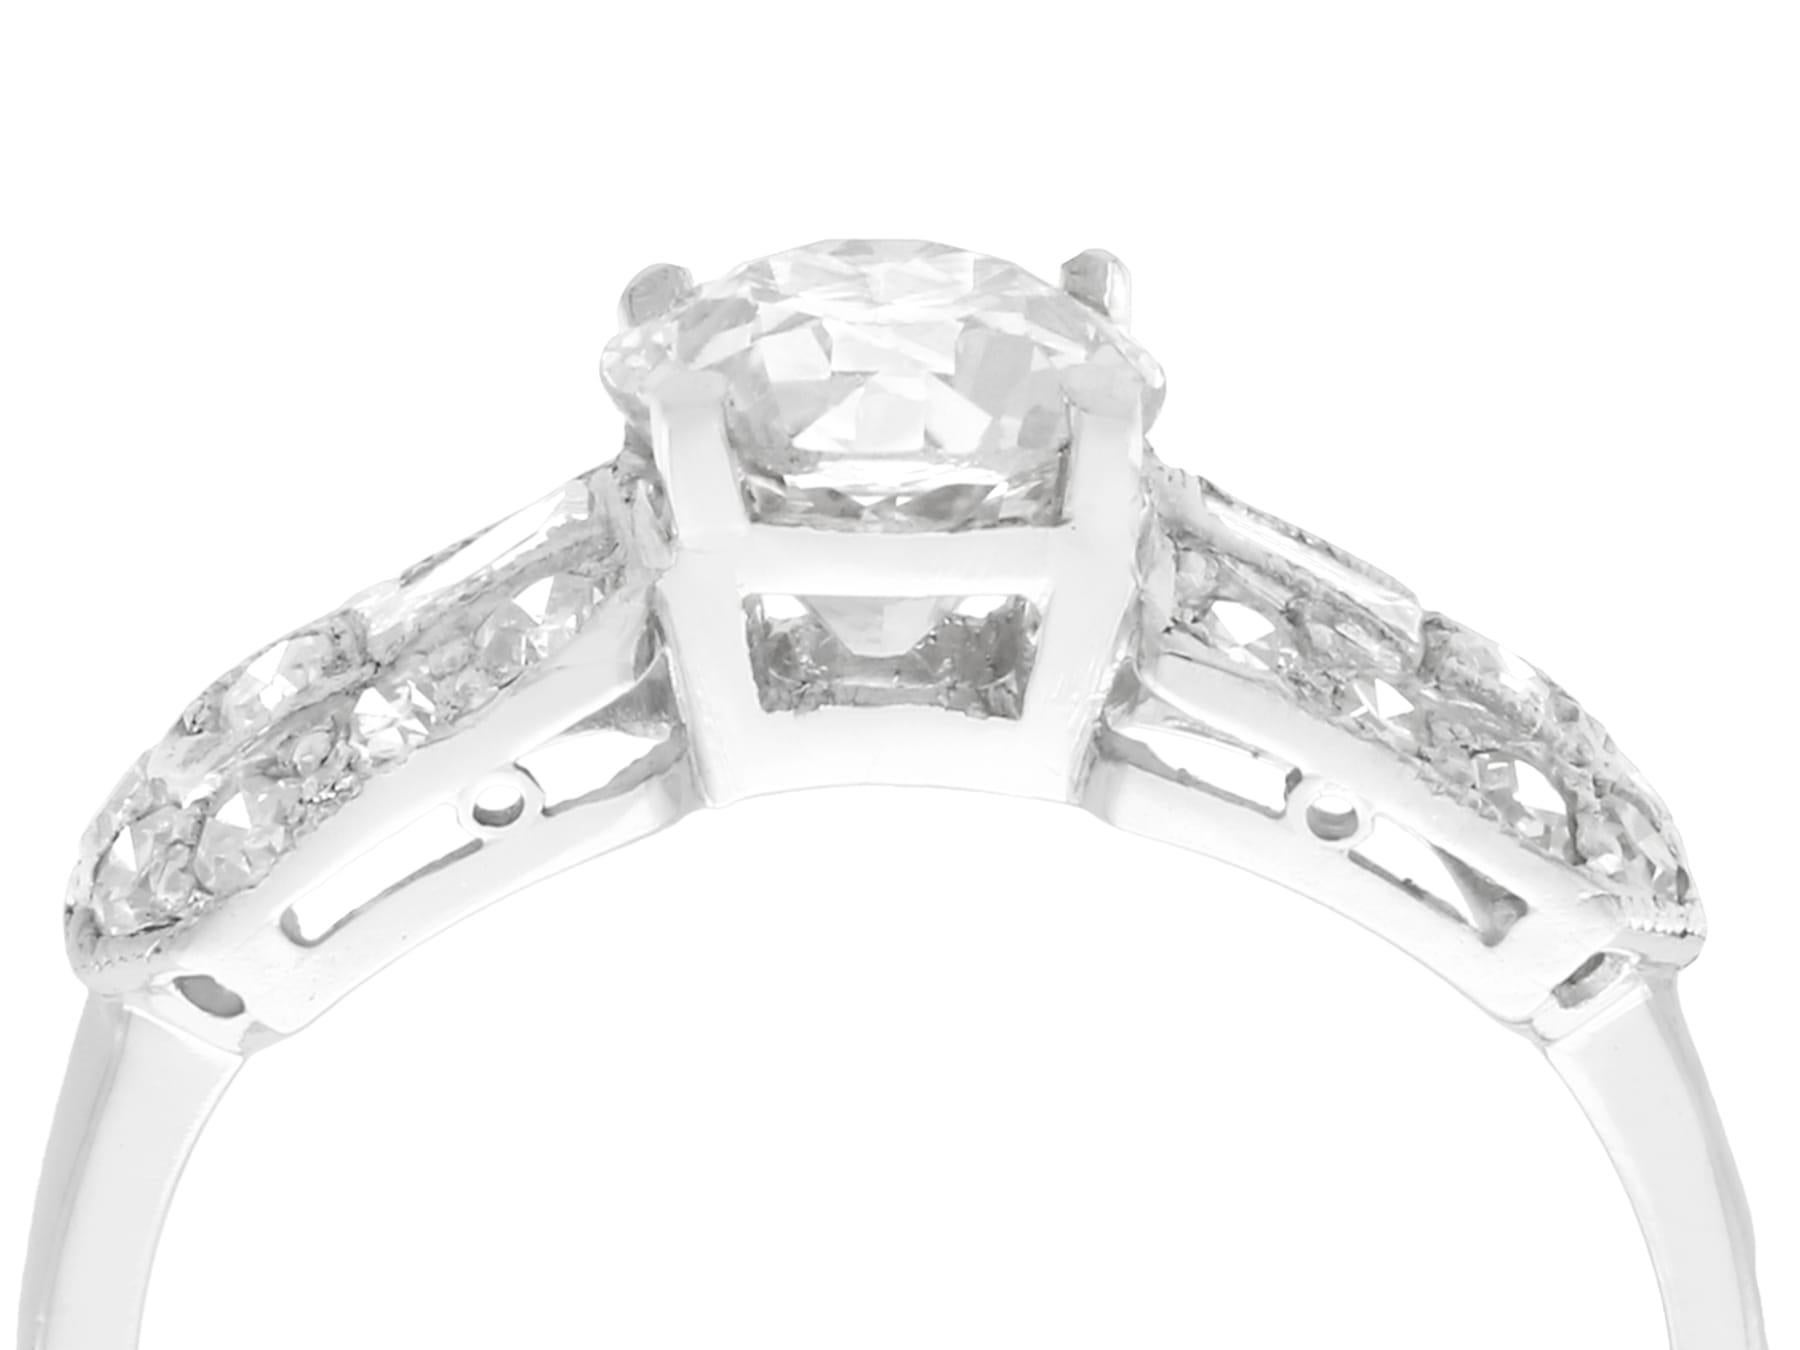 A fine and impressive vintage 1.20 carat diamond and platinum cocktail ring; part of our diverse vintage jewelry and estate jewelry collections.

This fine and impressive 1.20 carat diamond ring has been crafted in platinum.

The pierced decorated